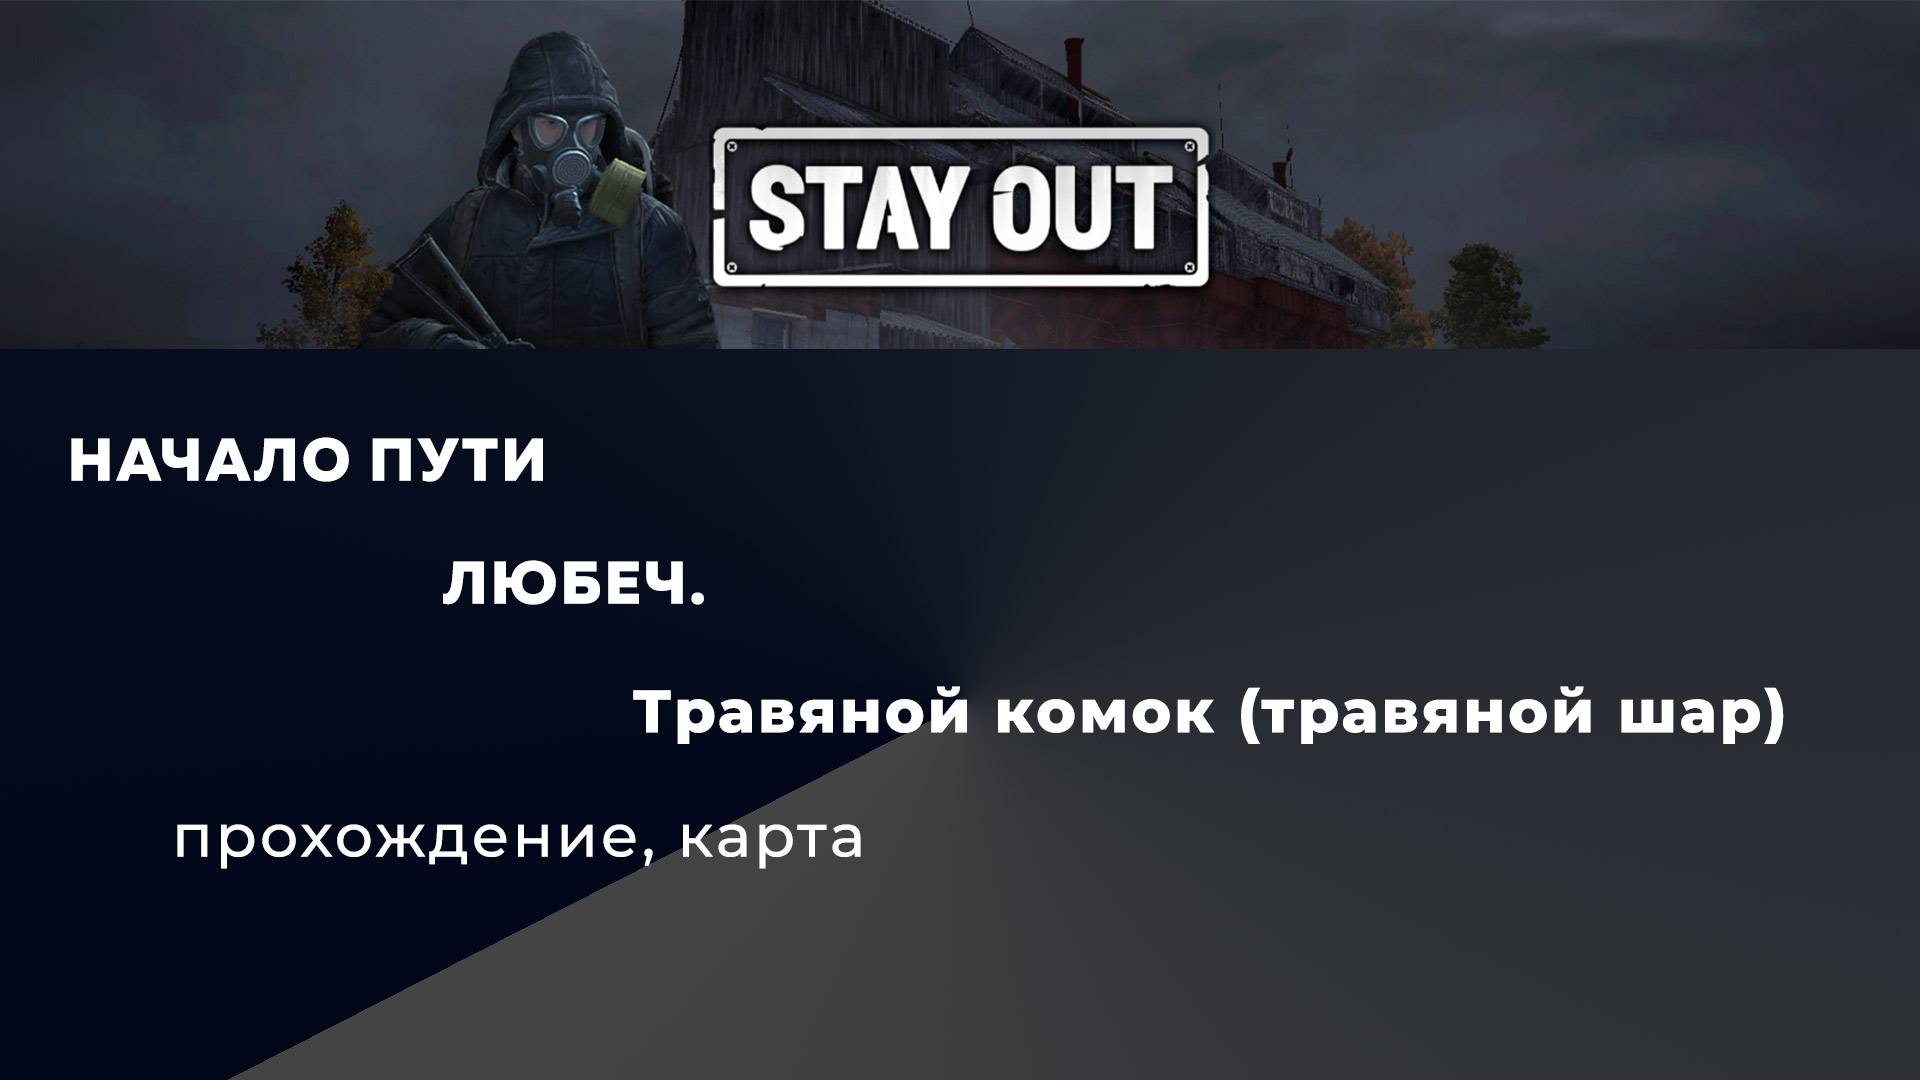 Stay Out_Травяной комок_шар